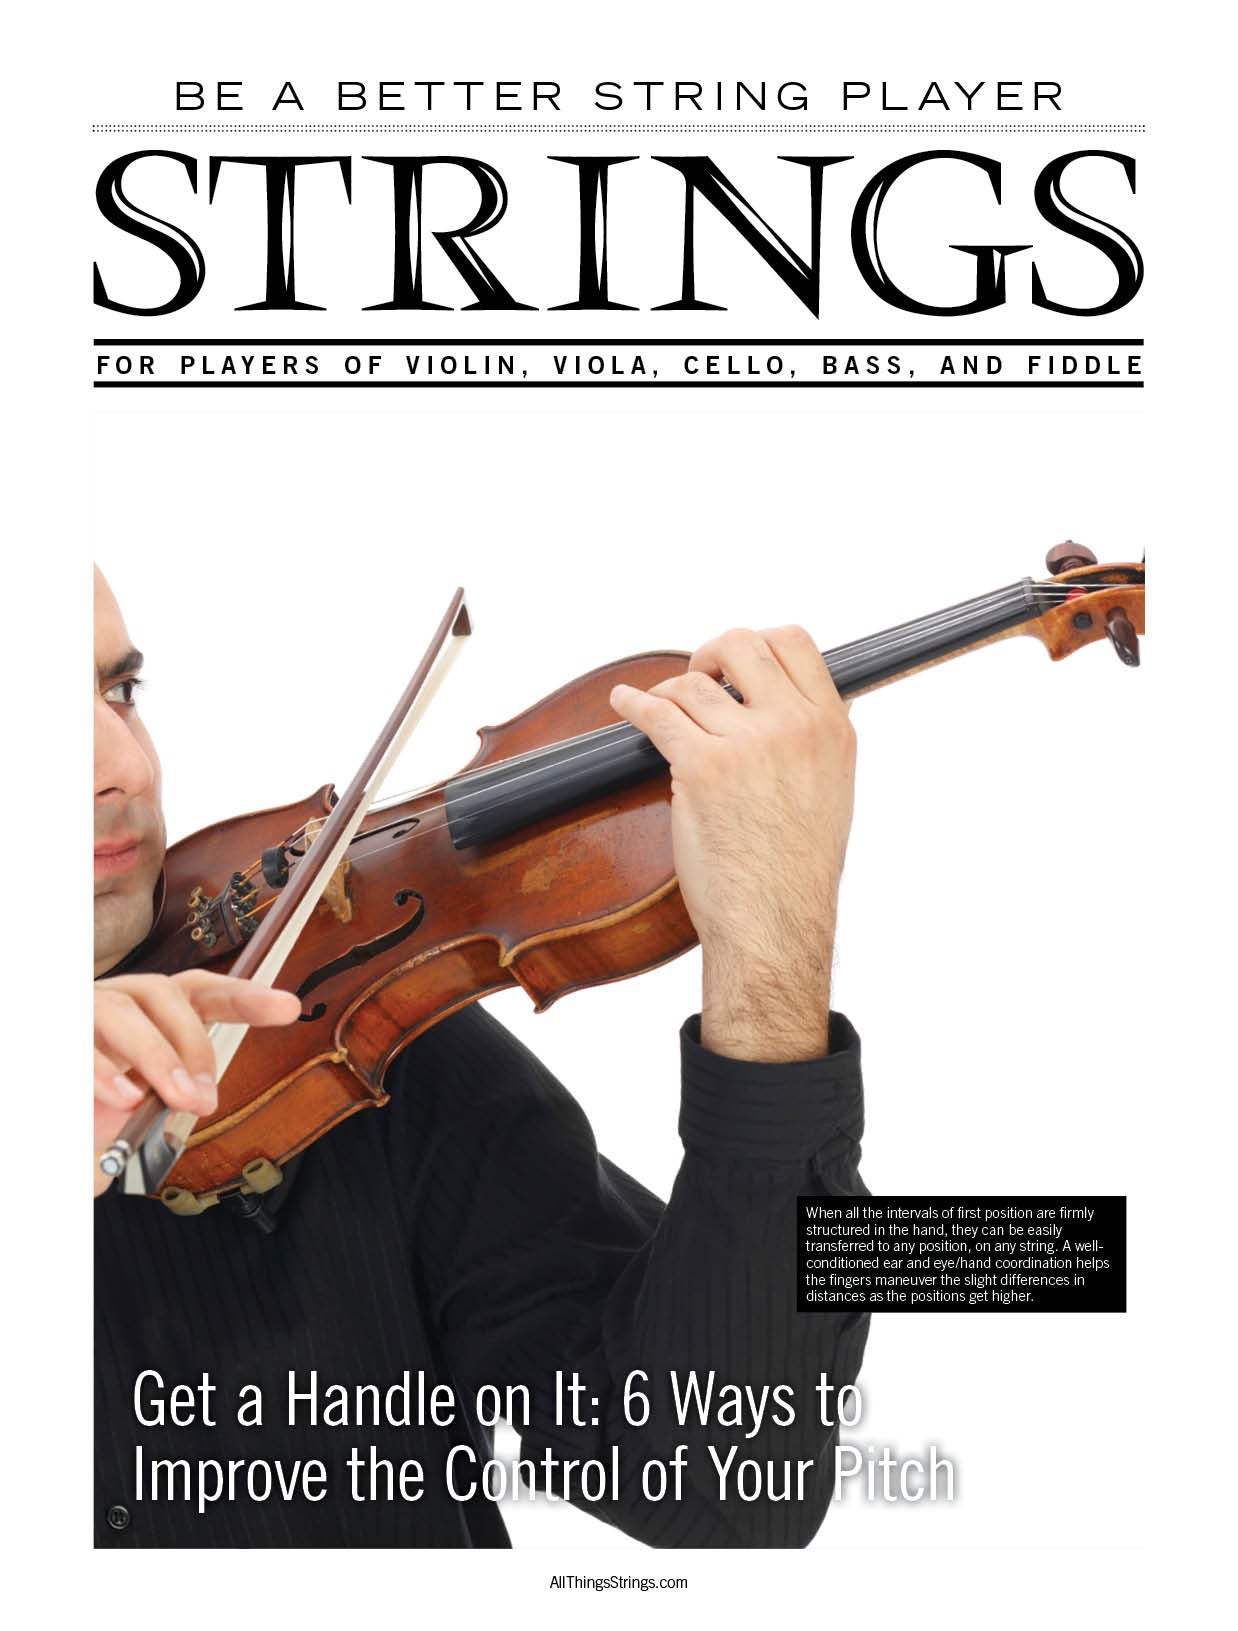 Be a Better String Player – Get a Handle on It - 6 Ways to Improve the Control of Your Pitch